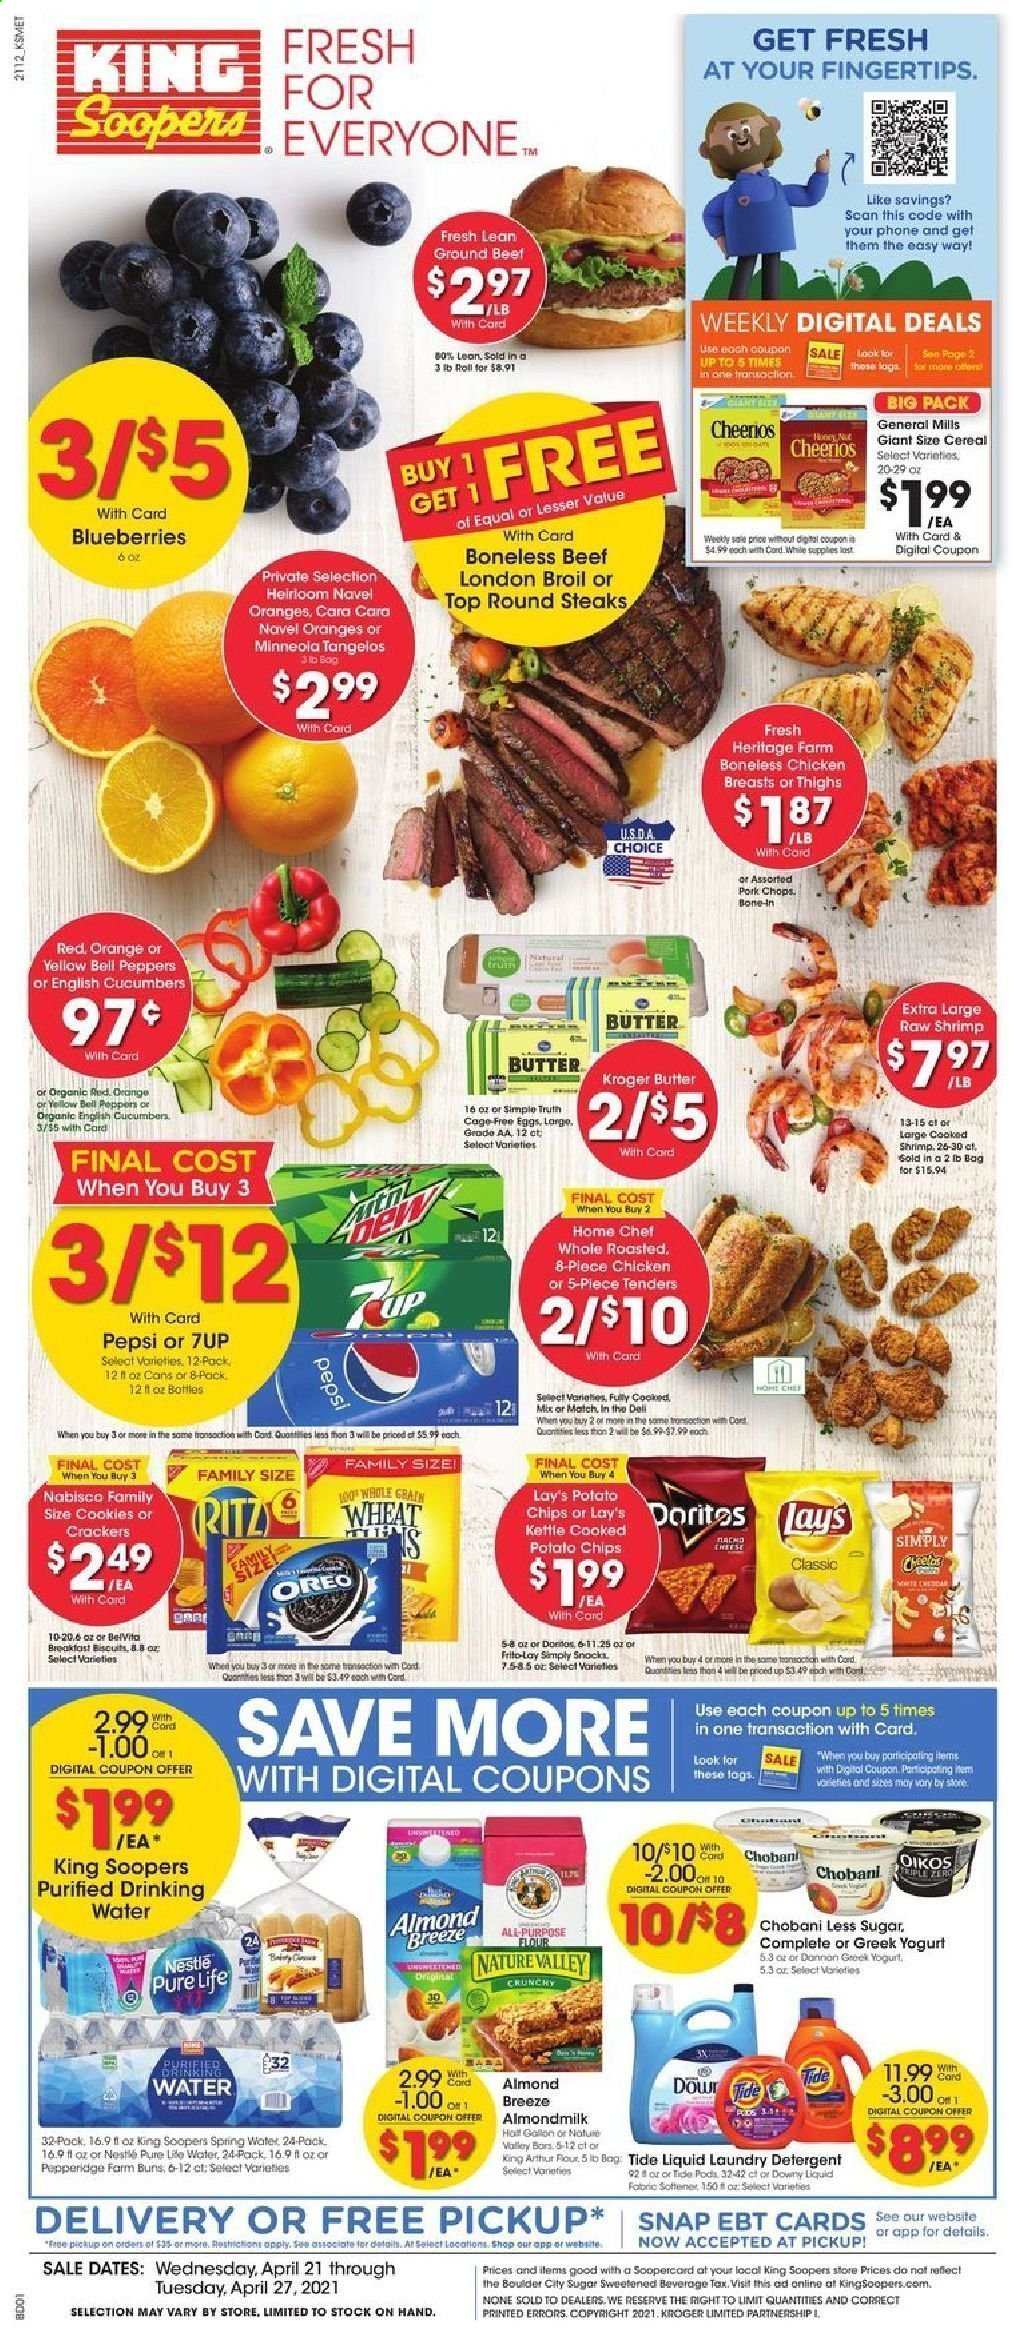 thumbnail - King Soopers Flyer - 04/21/2021 - 04/27/2021 - Sales products - gallon, tangelos, buns, bell peppers, cucumber, peppers, blueberries, oranges, shrimps, greek yoghurt, Oreo, yoghurt, Oikos, Chobani, almond milk, Almond Breeze, eggs, cage free eggs, butter, cookies, Nestlé, crackers, RITZ, Doritos, potato chips, chips, Lay’s, Frito-Lay, flour, cereals, Cheerios, belVita, Nature Valley, Pepsi, 7UP, spring water, chicken breasts, beef meat, ground beef, steak, pork chops, pork meat, detergent, Tide, fabric softener, laundry detergent, Downy Laundry, bag, navel oranges. Page 1.